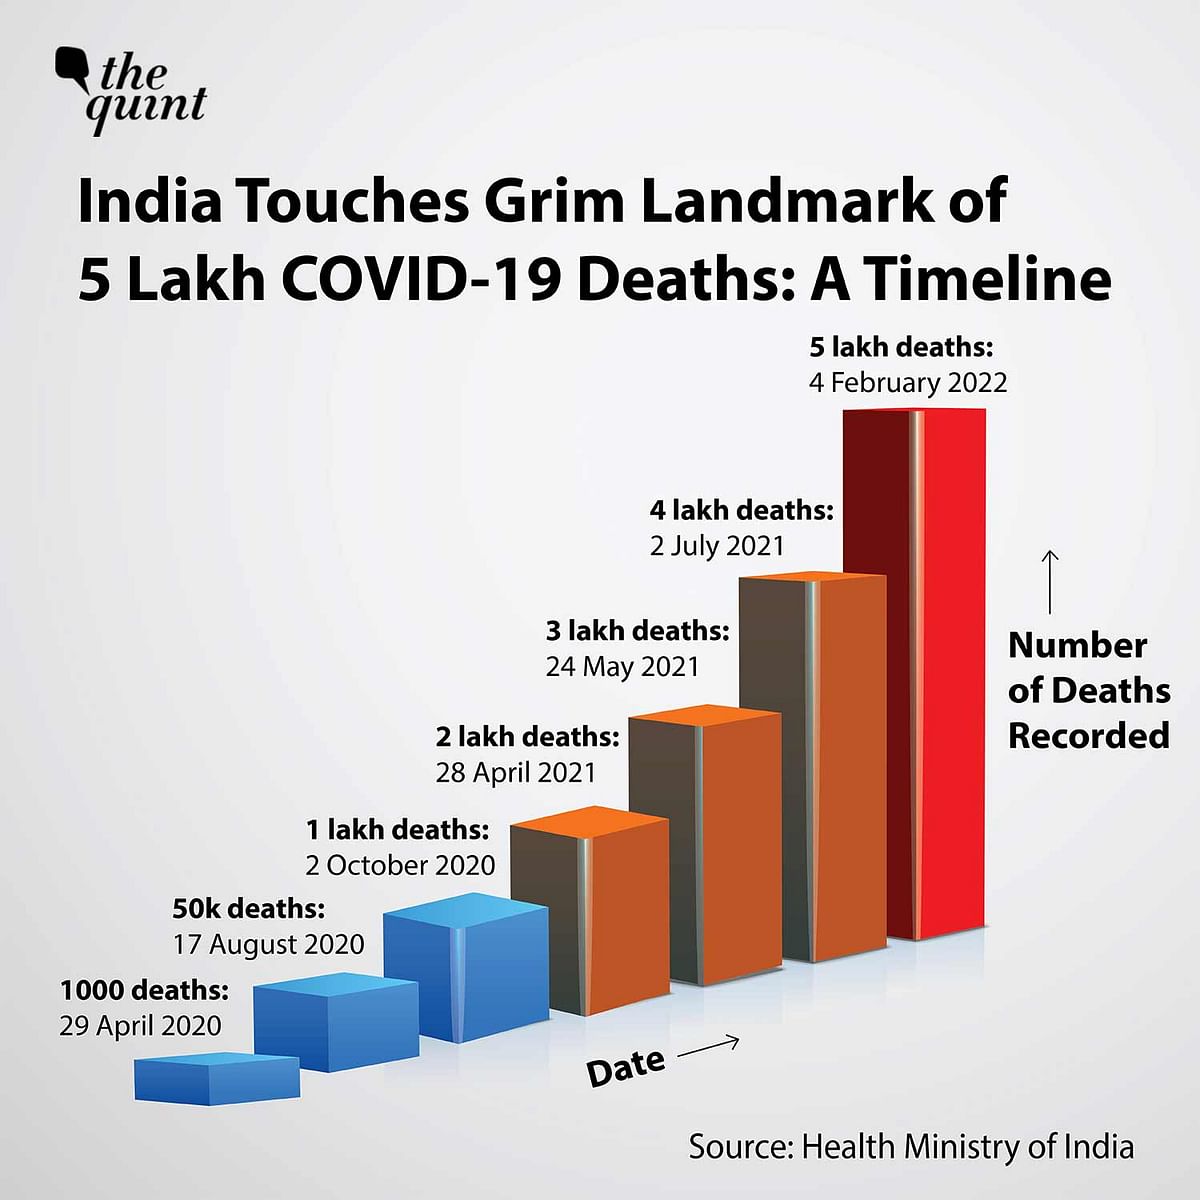 2 Years On, India Touches Grim Landmark of 5 Lakh COVID-19 Deaths: A Timeline